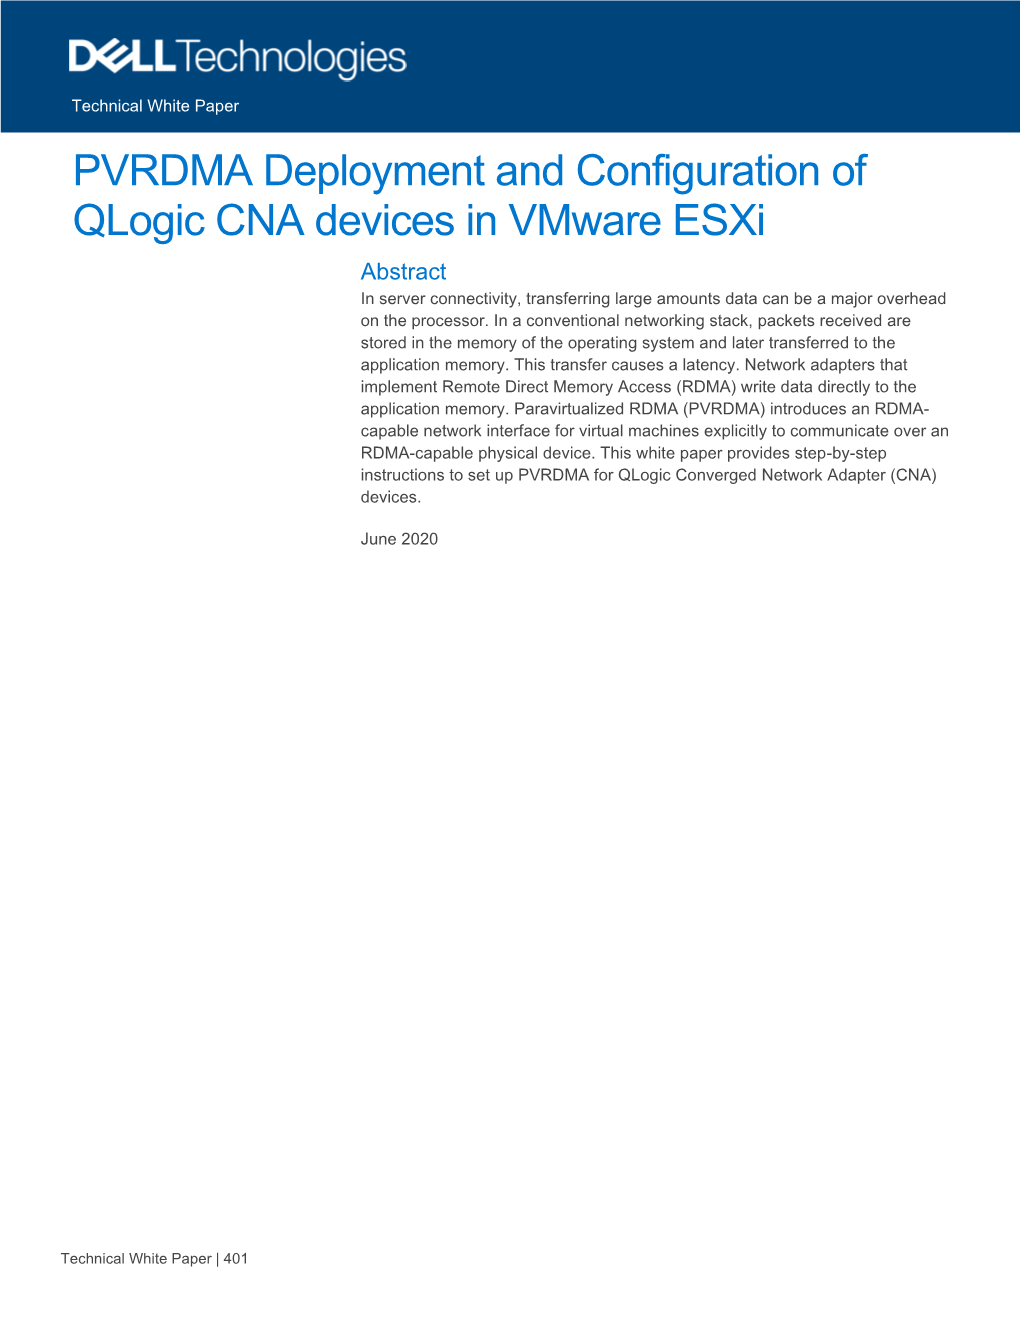 PVRDMA Deployment and Configuration of Qlogic CNA